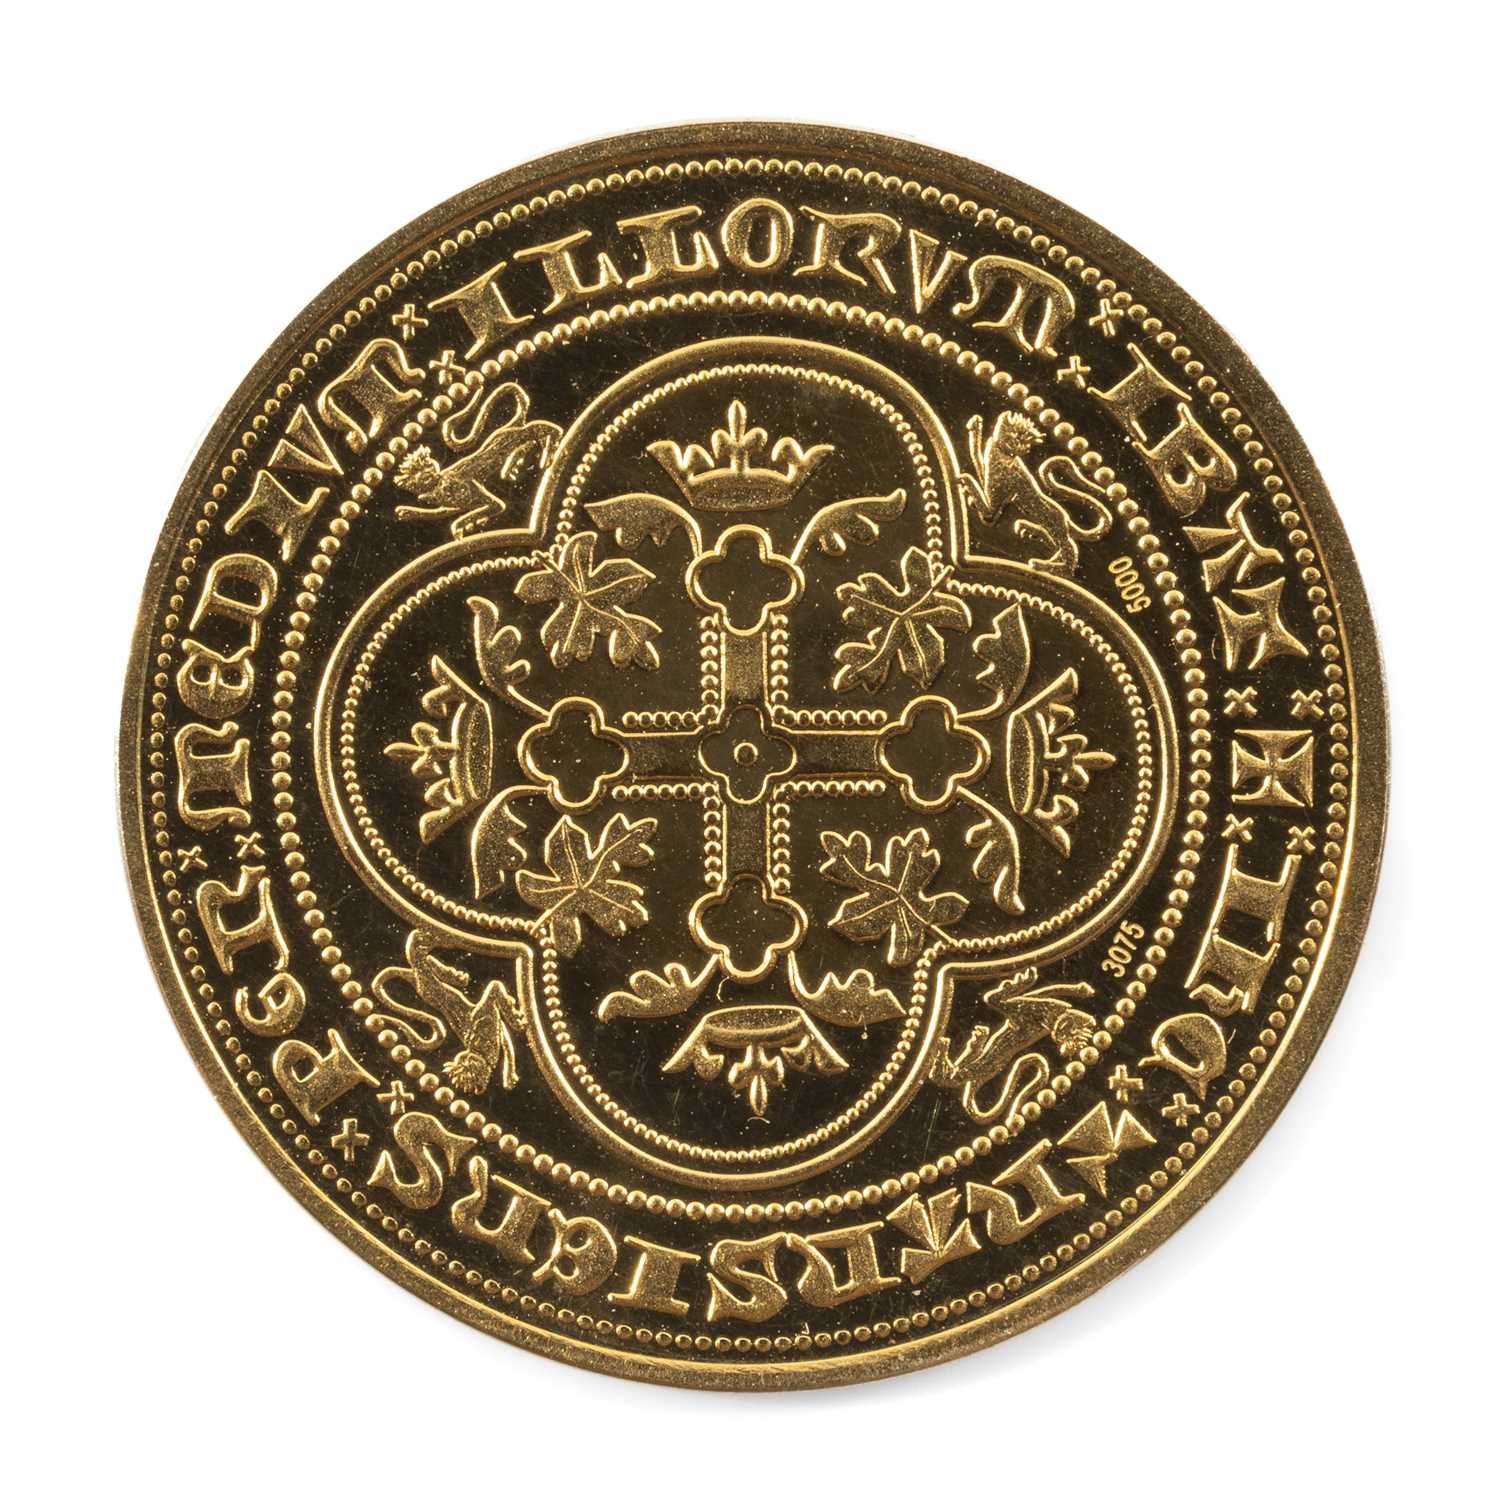 RESTRIKE DOUBLE LEOPARD GOLD COIN, from an edition of 5000, 4.0gms Provenance: private collection - Image 2 of 2